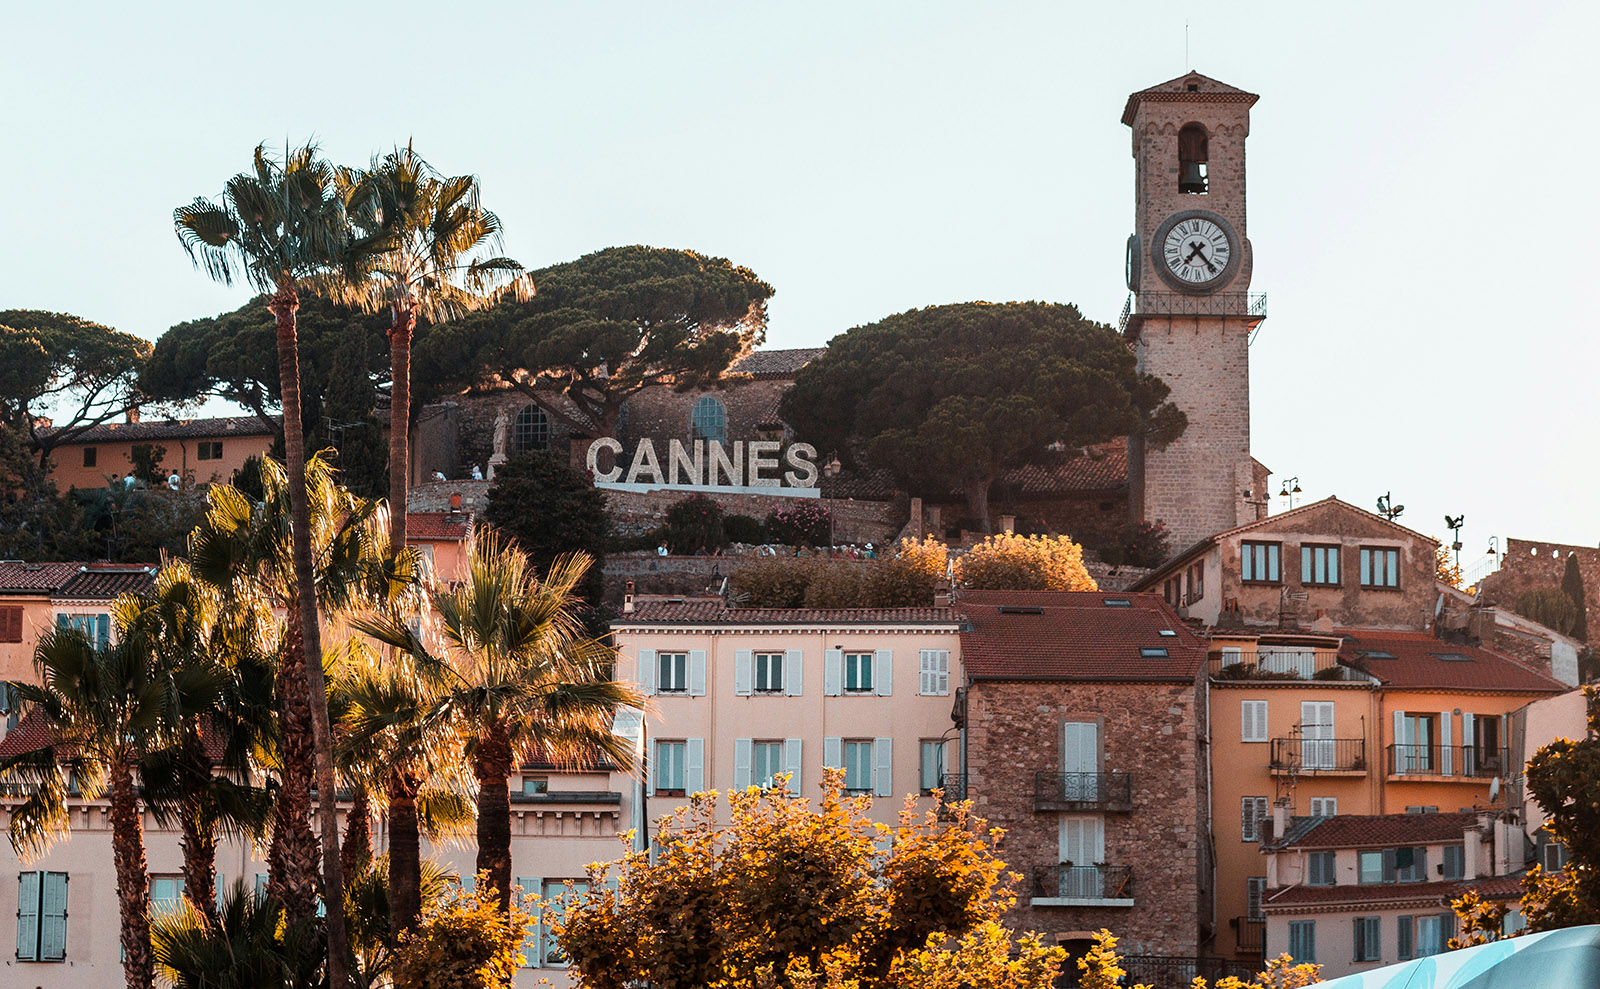 pastel colored houses on a hill with a sign that says cannes in big white letters